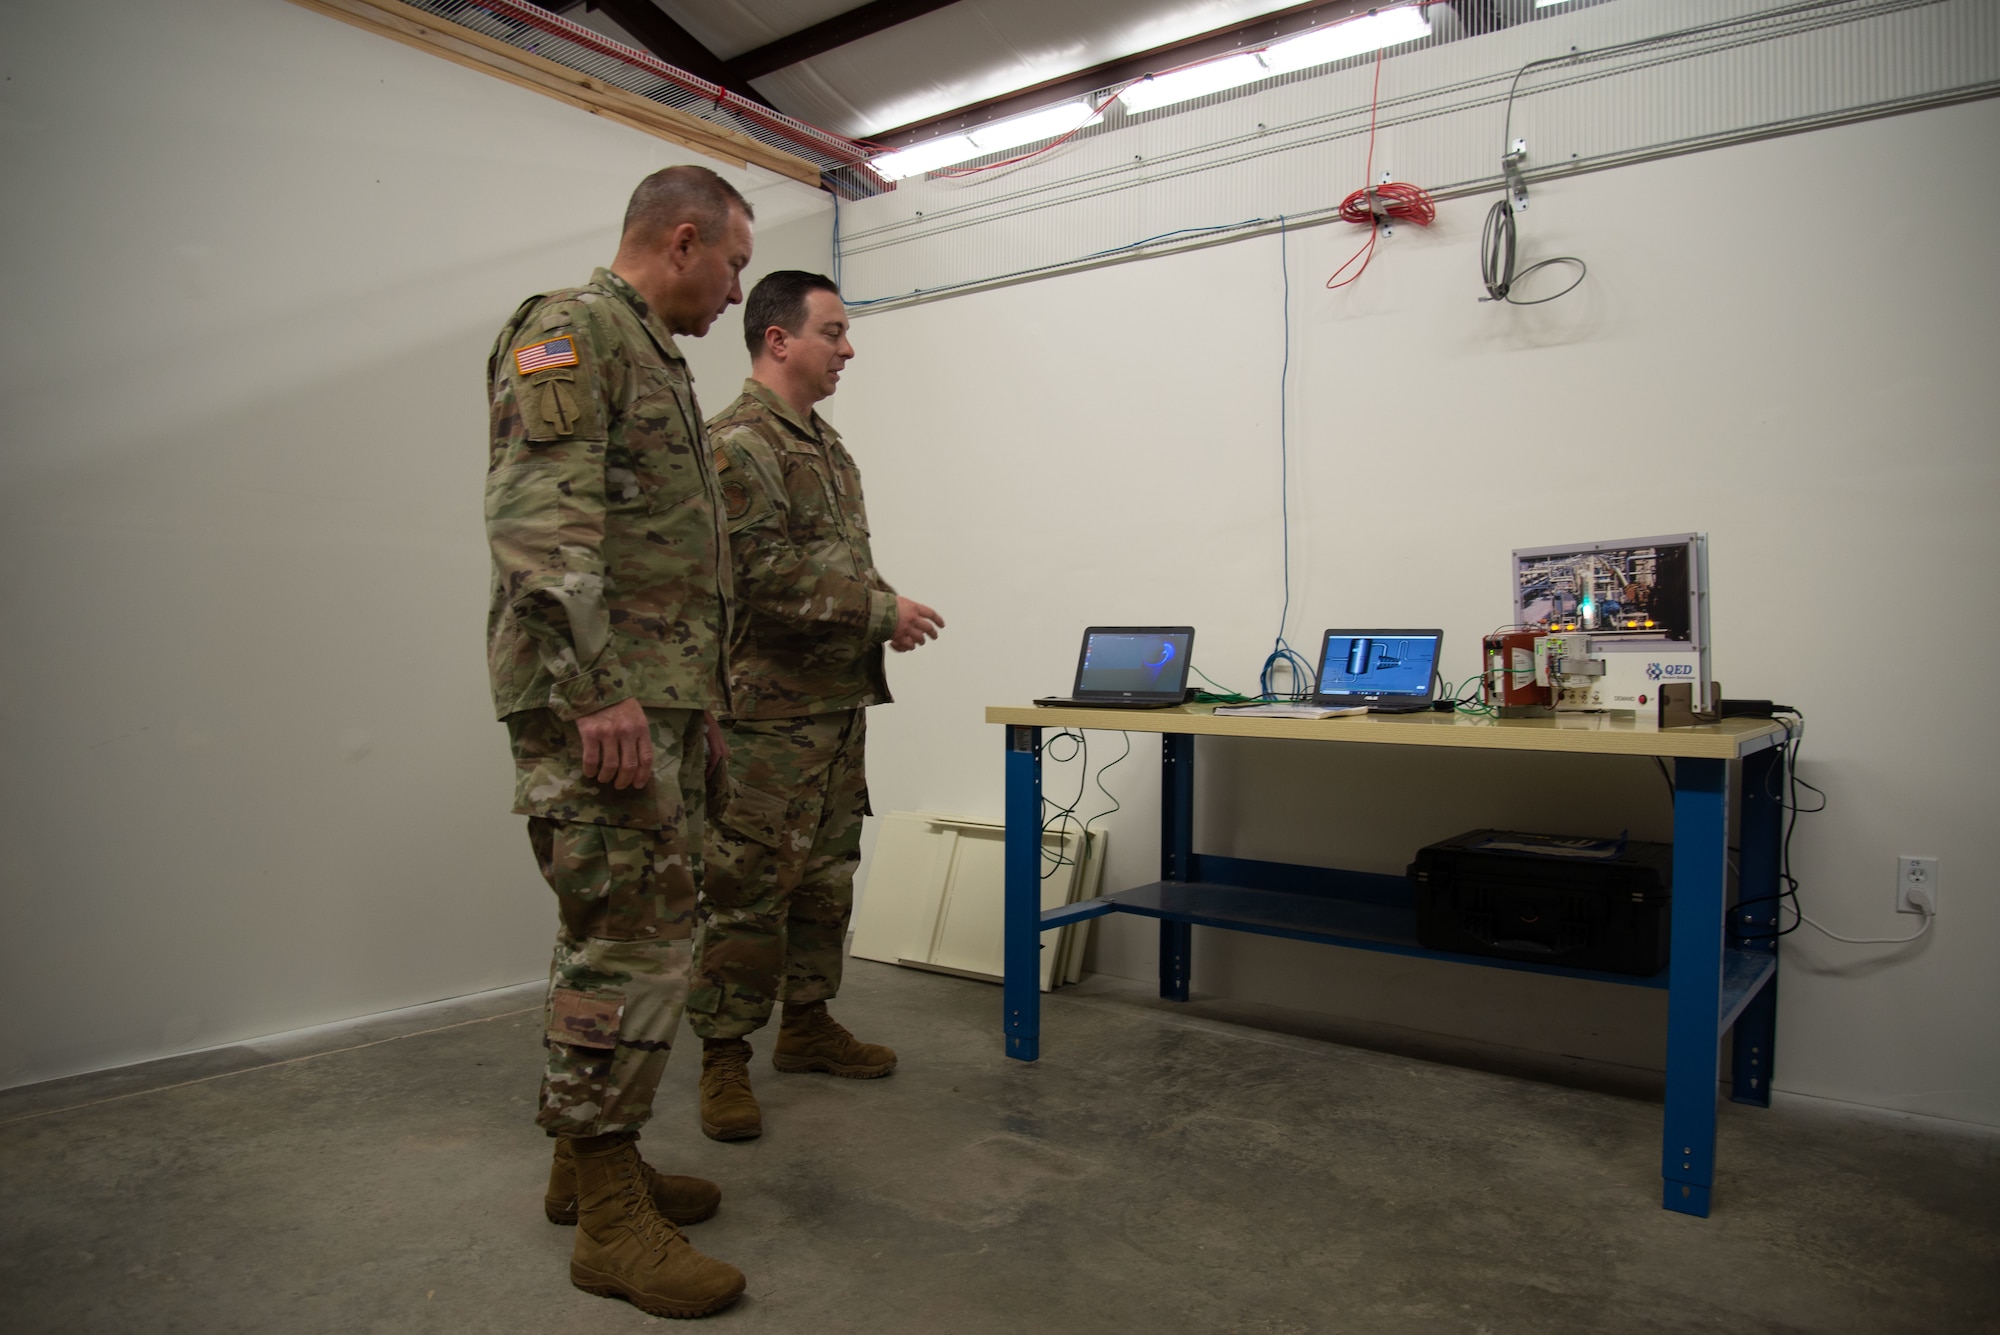 Maj. Gen. Anthony Hale, Commander, U.S. Army Center of Excellence and Fort Huachuca, listens as 1st Lt. Aaron Rutten, 175th Cyber Operations Group, Maryland Air National Guard demonstrates key ideas of cyber protection while on a tour on Camp Shelby Joint Forces Training Center, Mississippi, April 22, 2023.